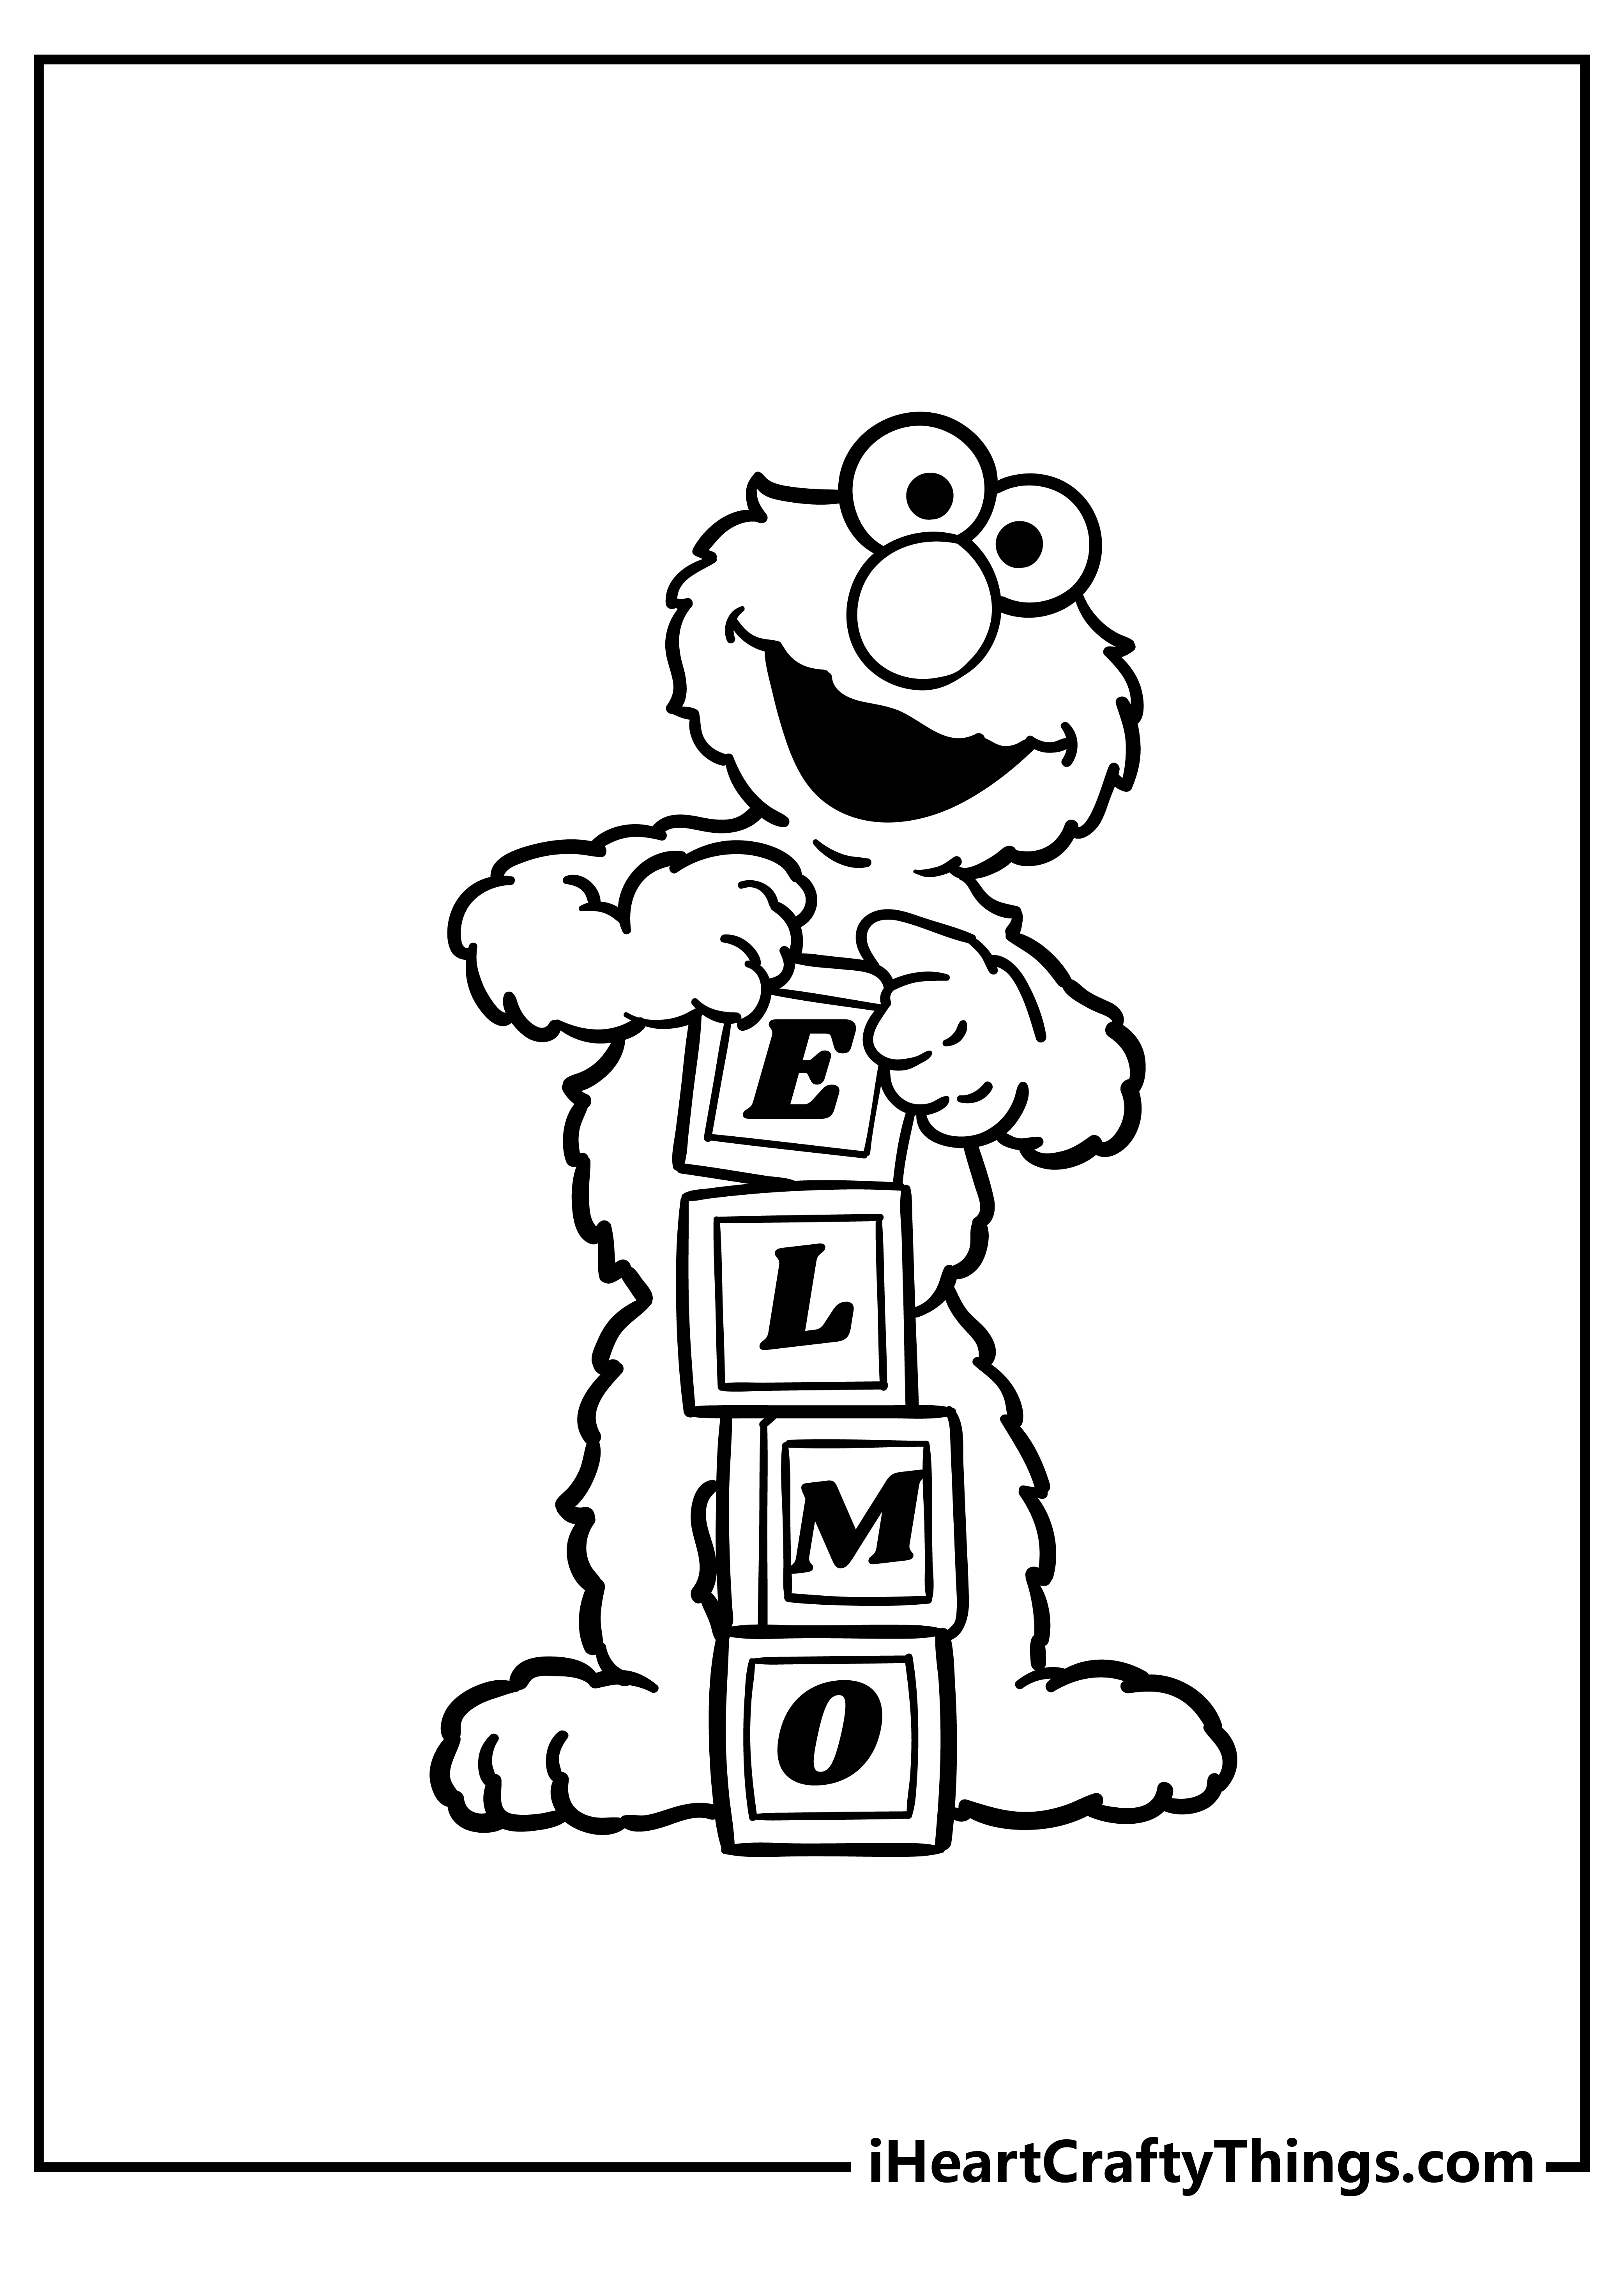 Elmo coloring pages free printables